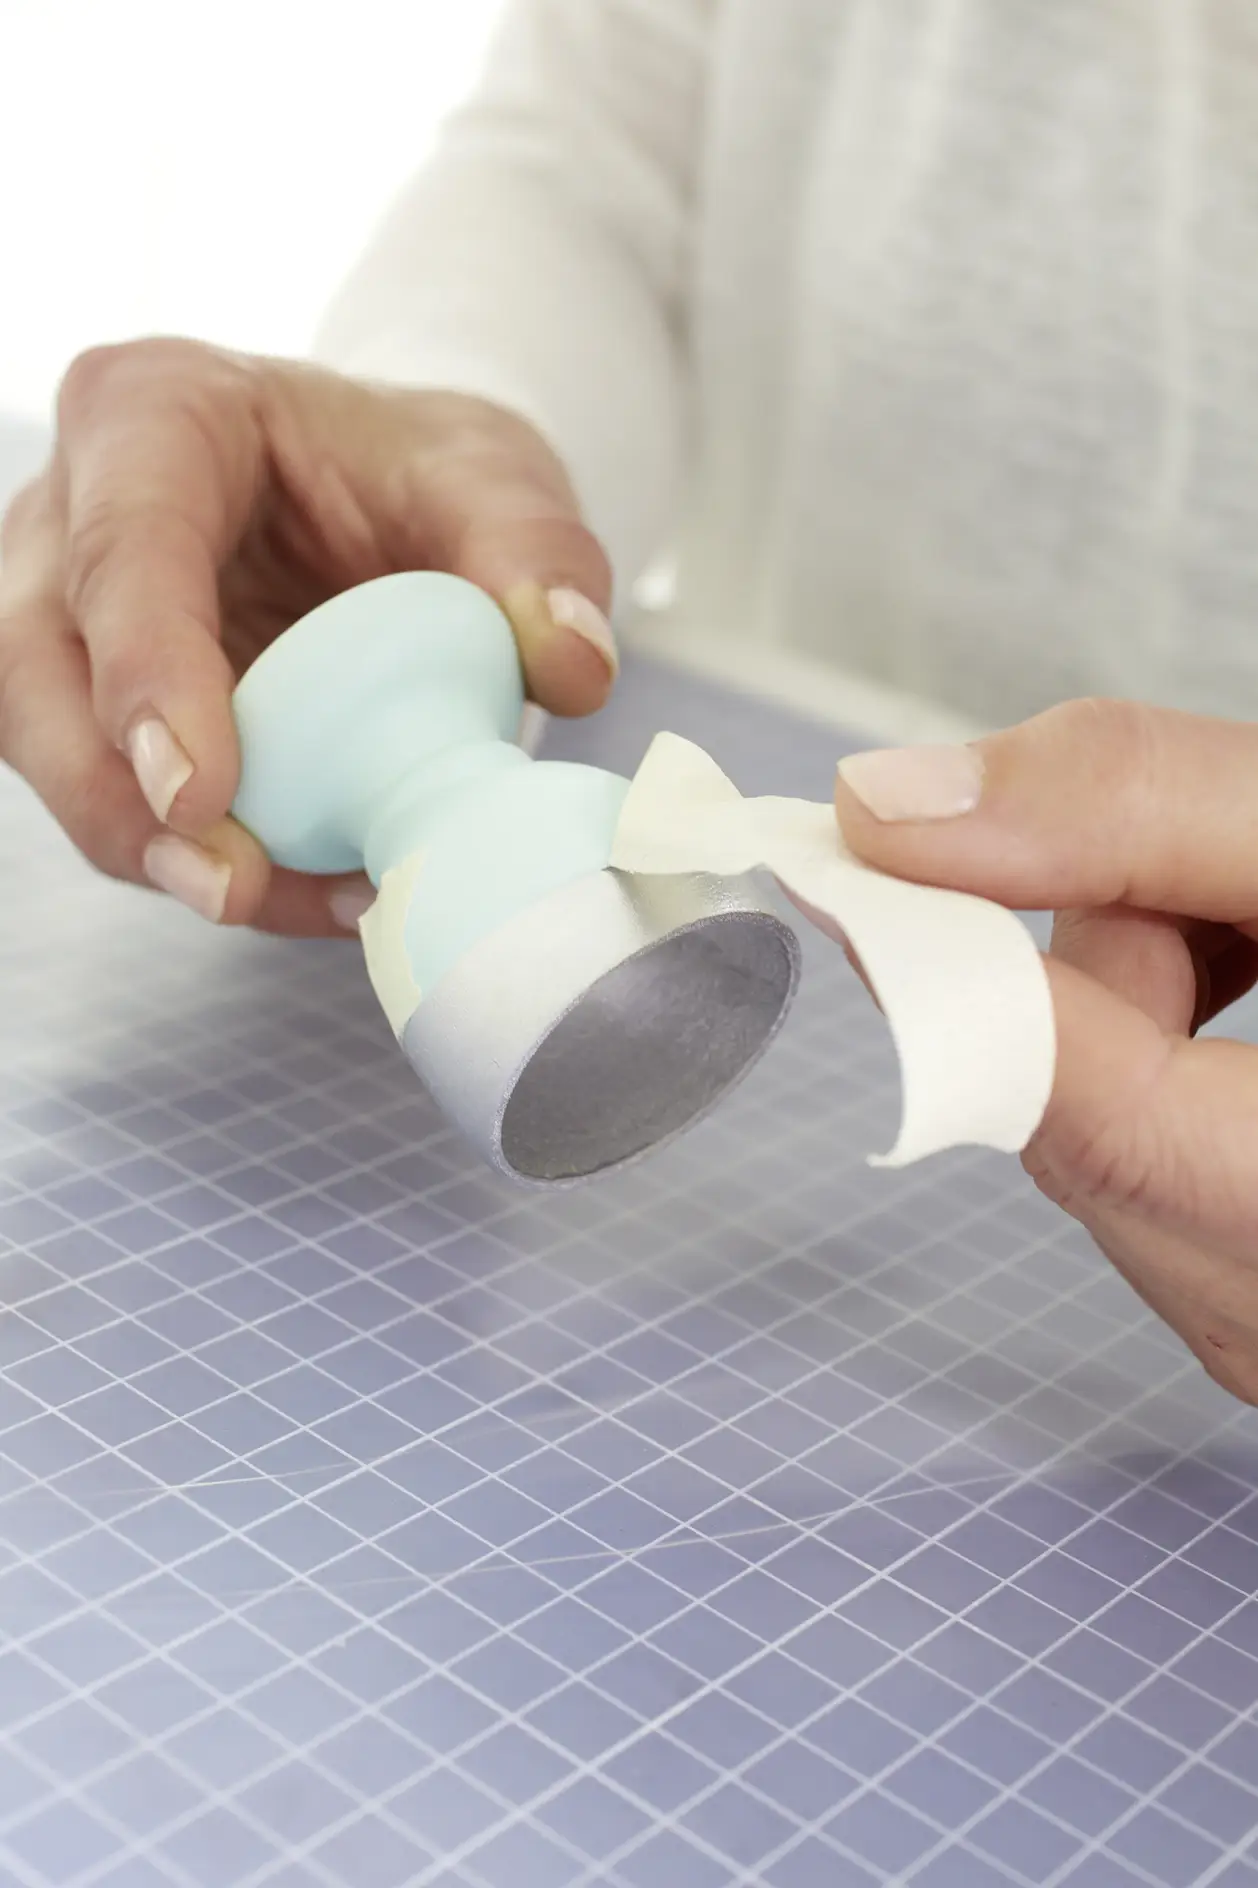 Allow to dry, then carefully remove the tesa® Masking Tape PREMIUM CLASSIC.